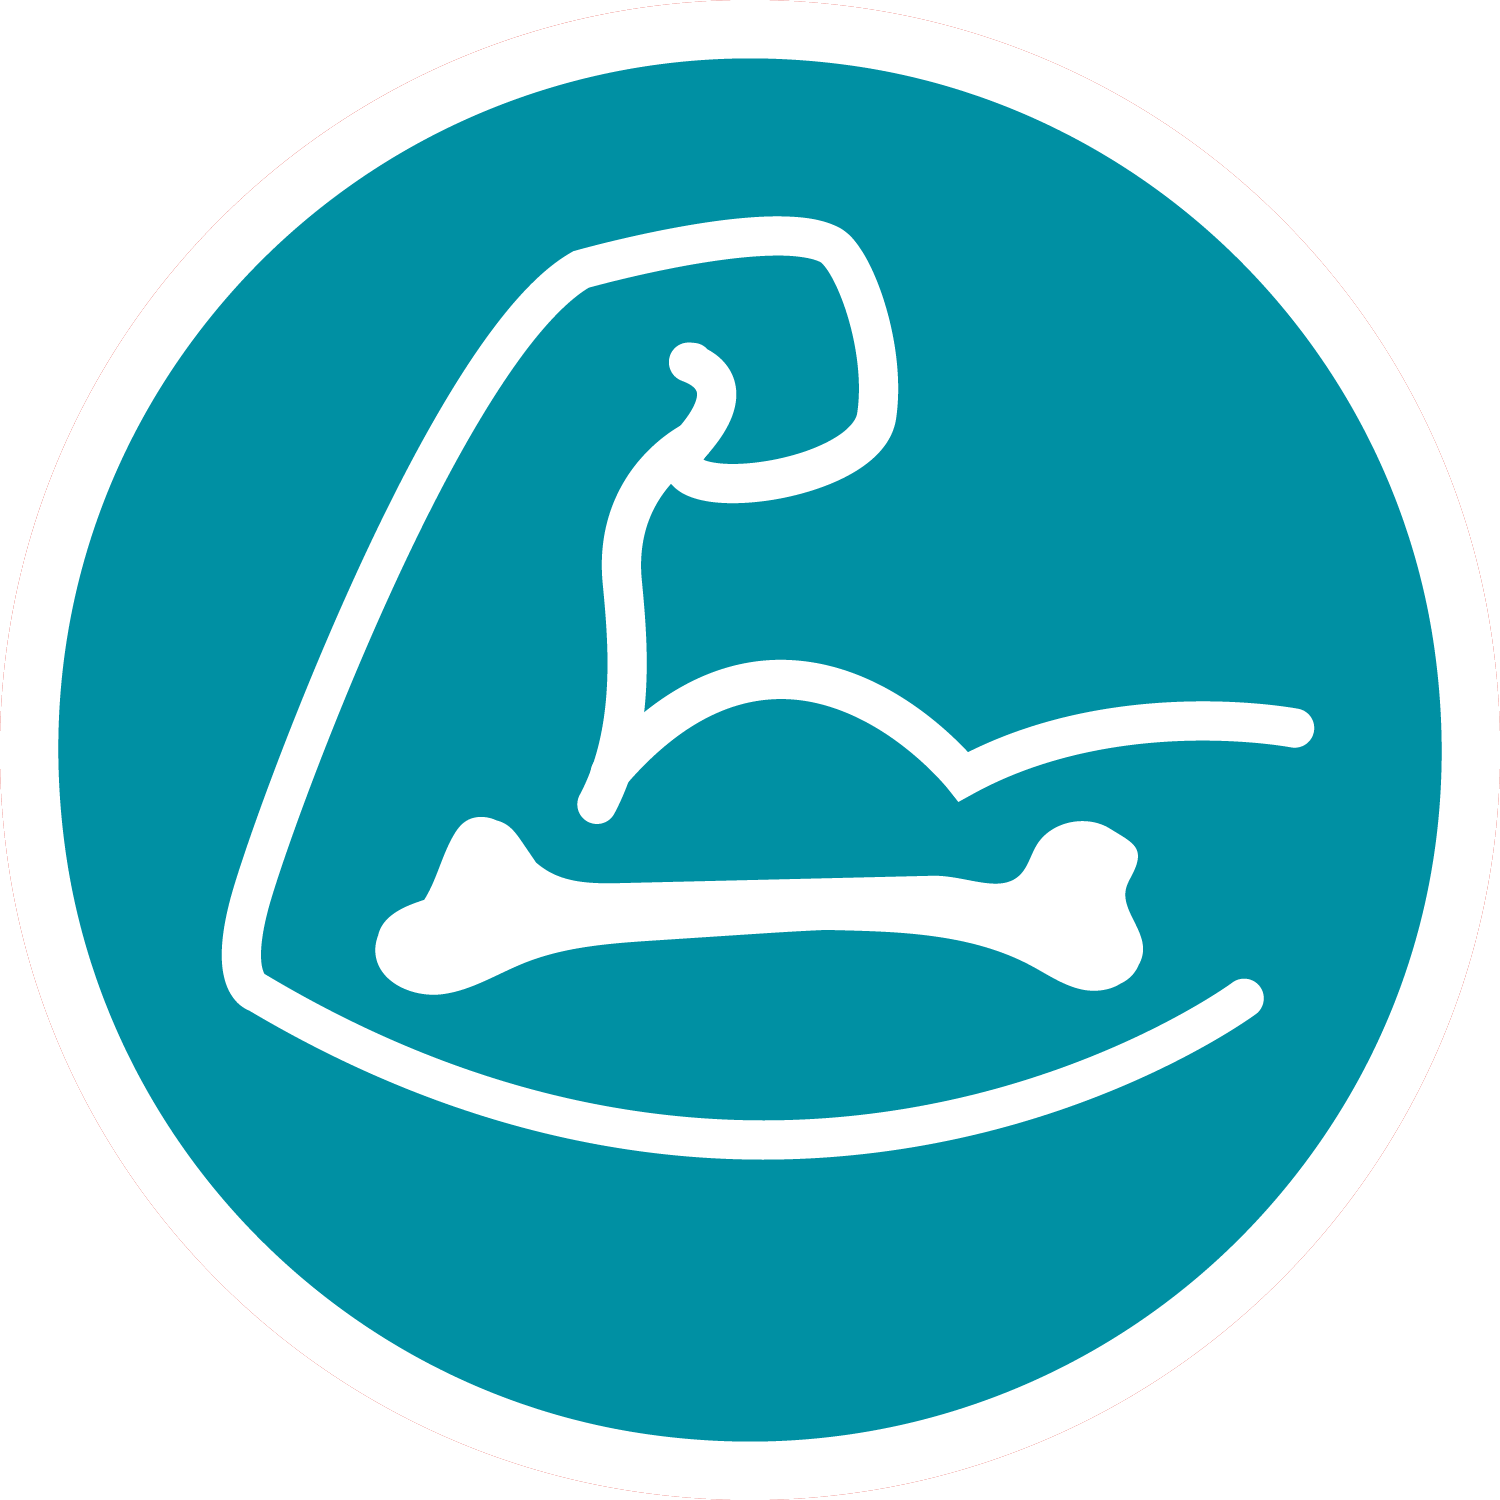 A circular blue icon of a bicep outlined in white